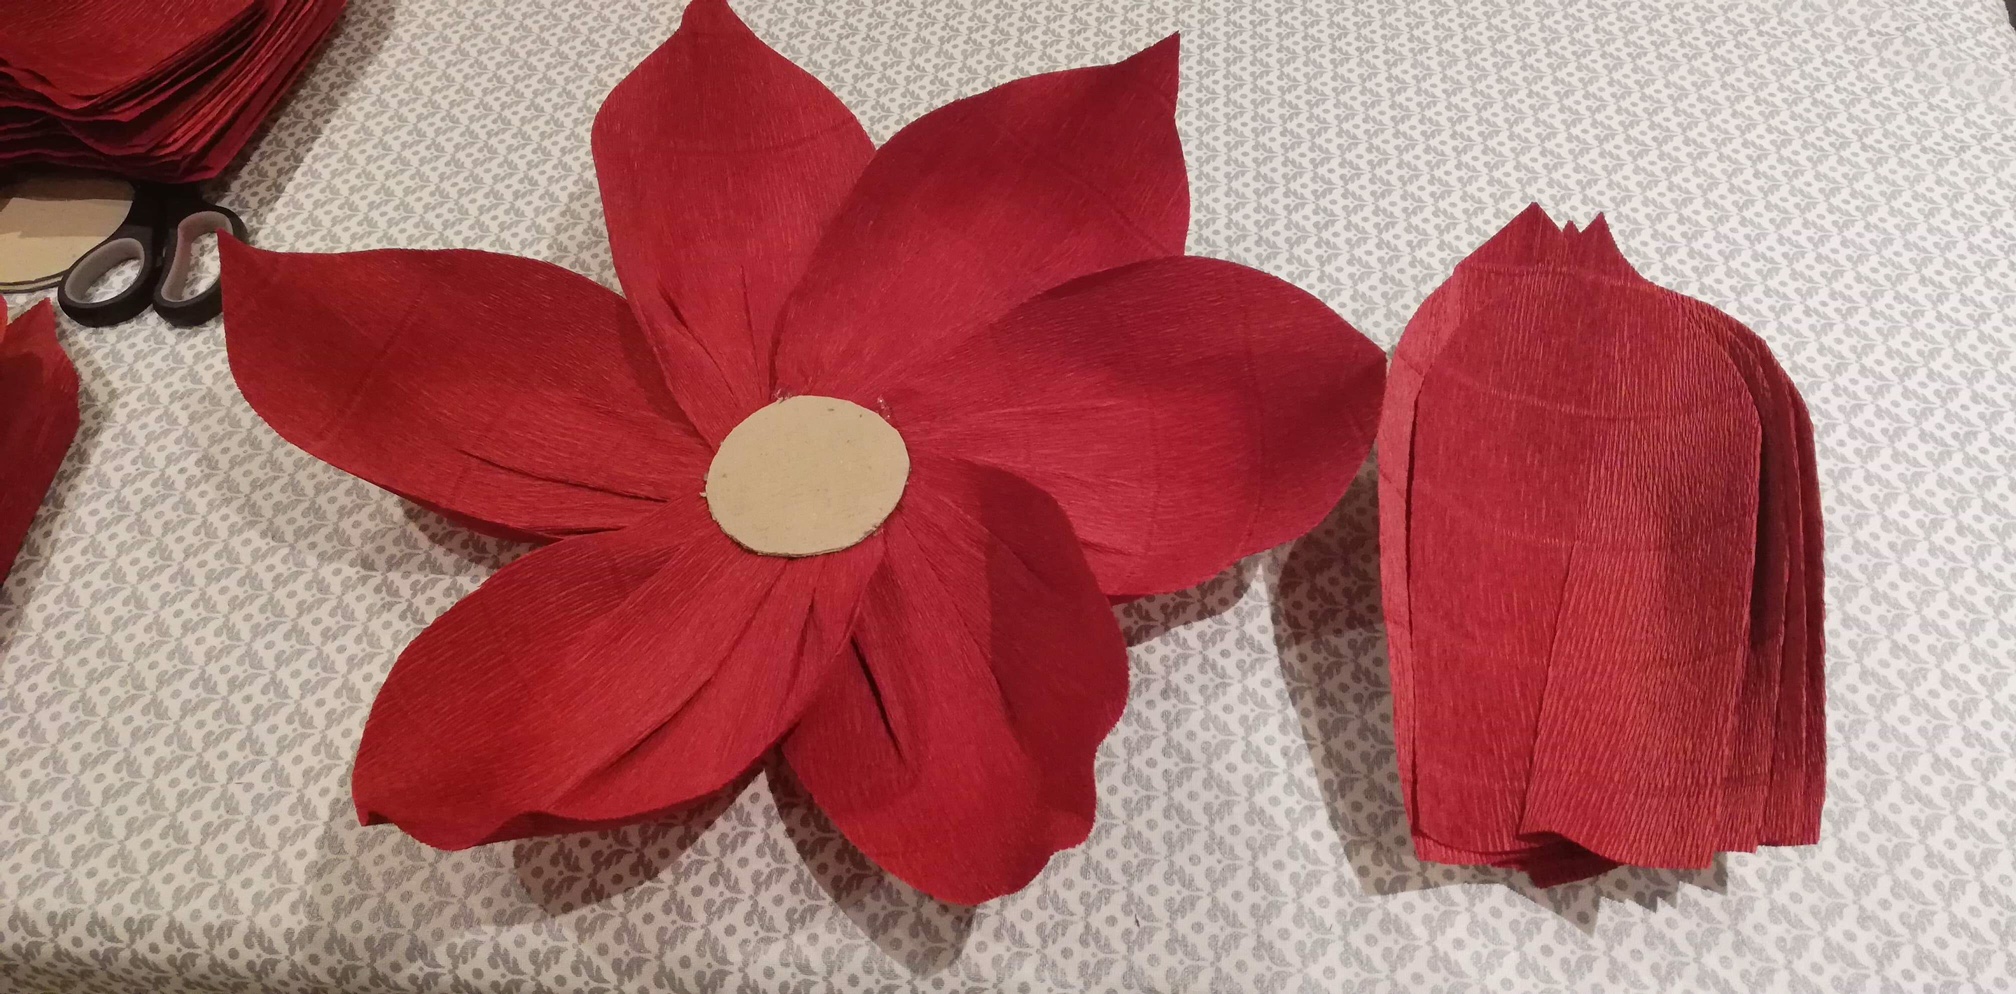 How to Make a Large Paper Flower